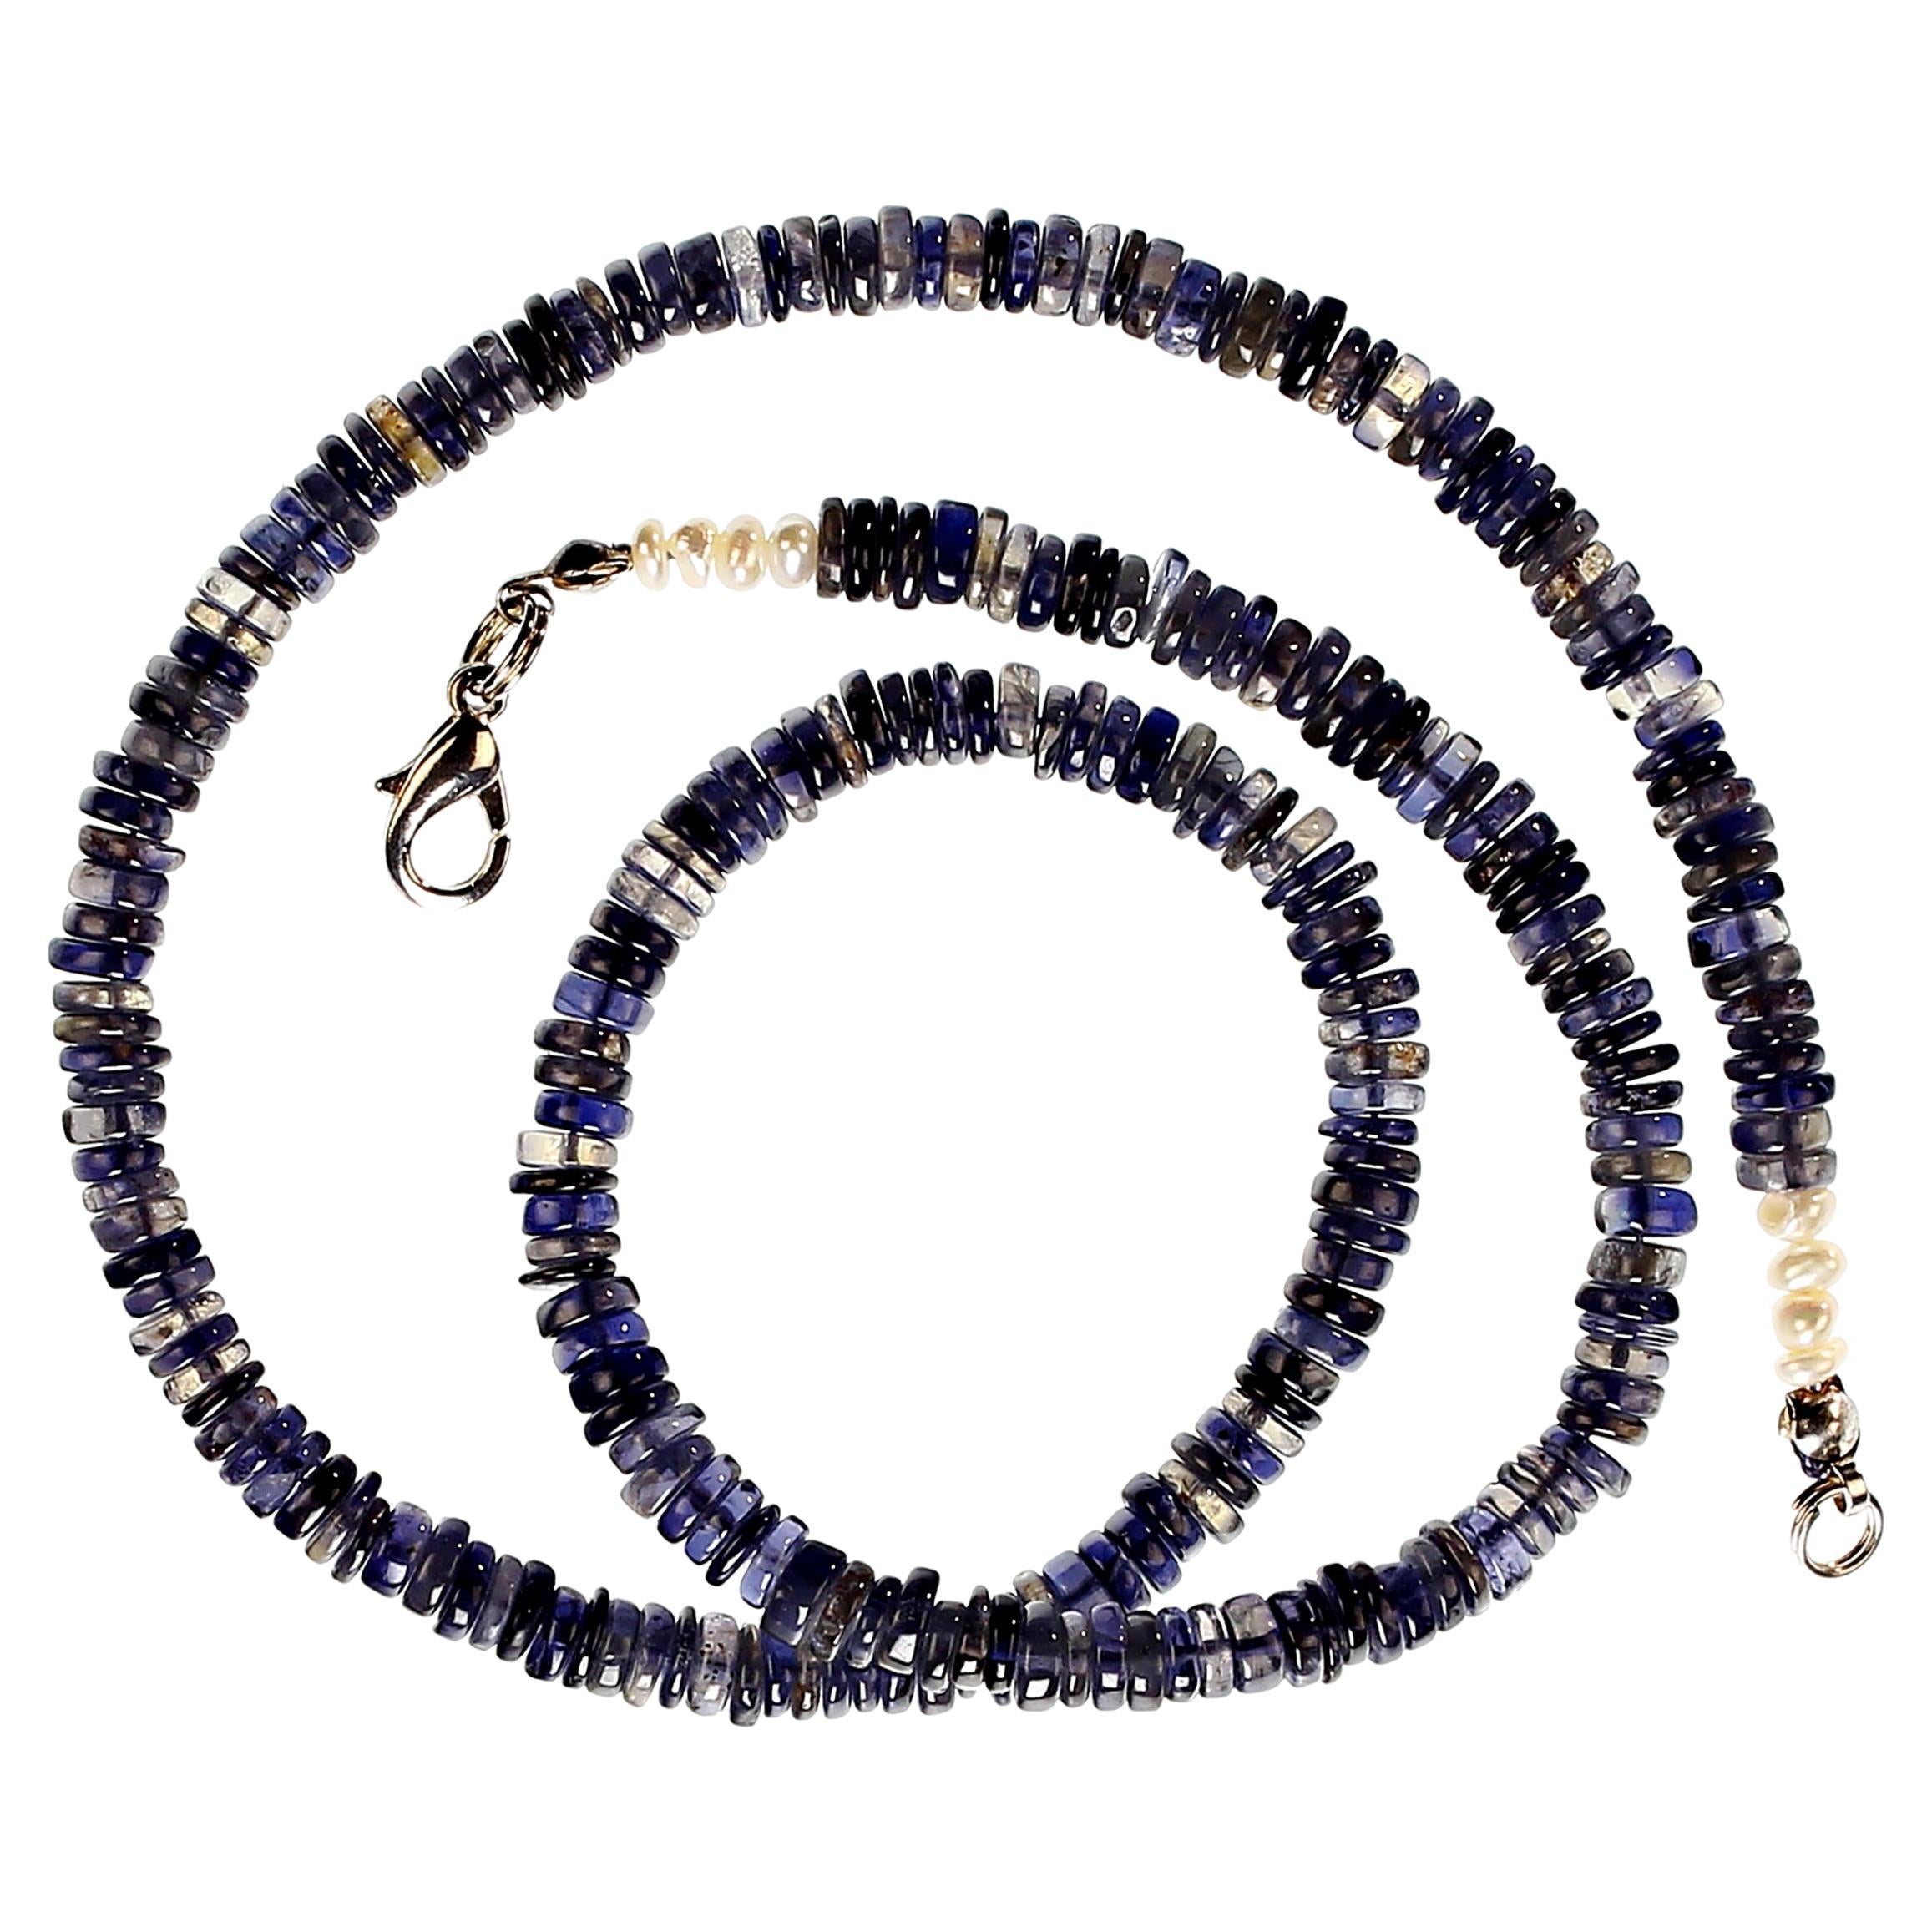 18 Inches of lovely blue Iolite. Iolite is a trichroic gemstone which means that is will present itself in three different colors depending on the way one looks at it:  Blue, gray, or straw (yellow). How exciting is that!!These are 5MM smooth flat